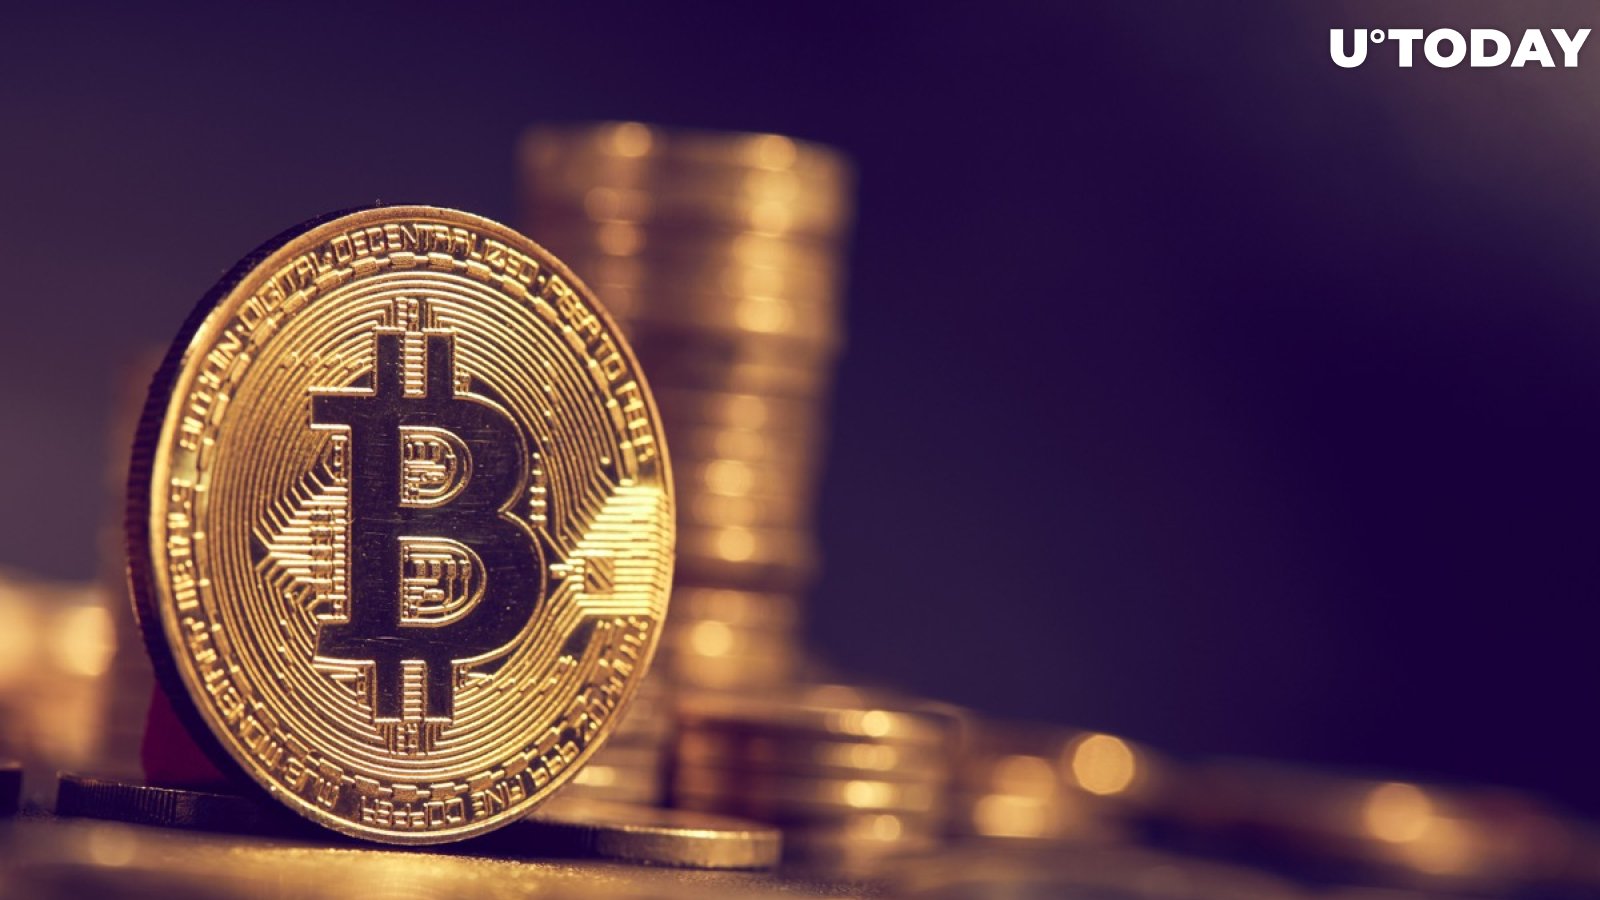 Bitcoin (BTC) Surges to New Multi-Month High as Recovery Picks Up Steam